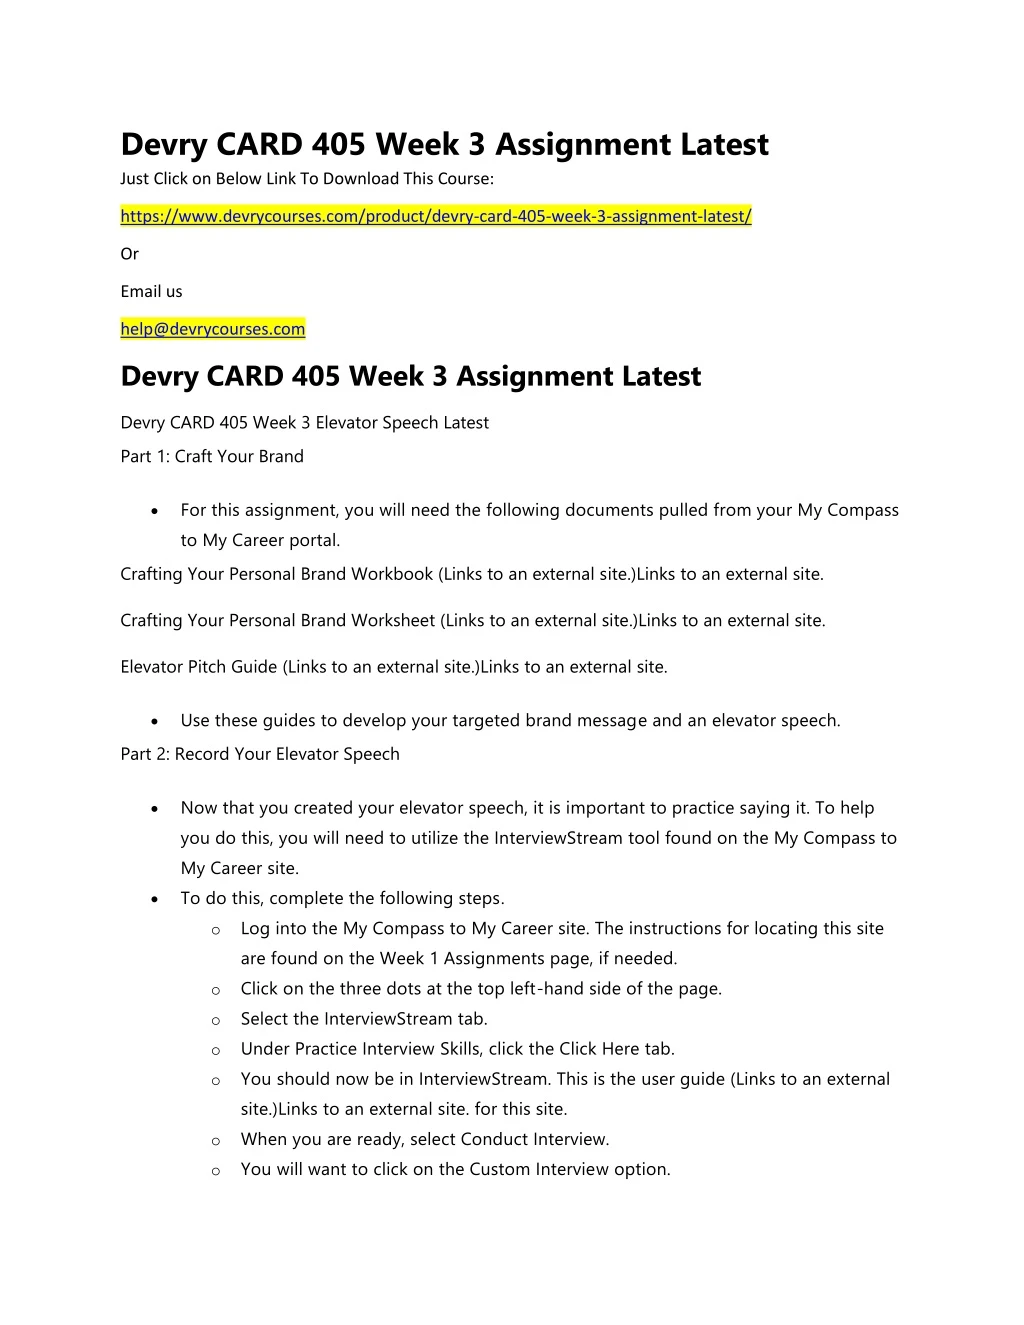 devry card 405 week 3 assignment latest just